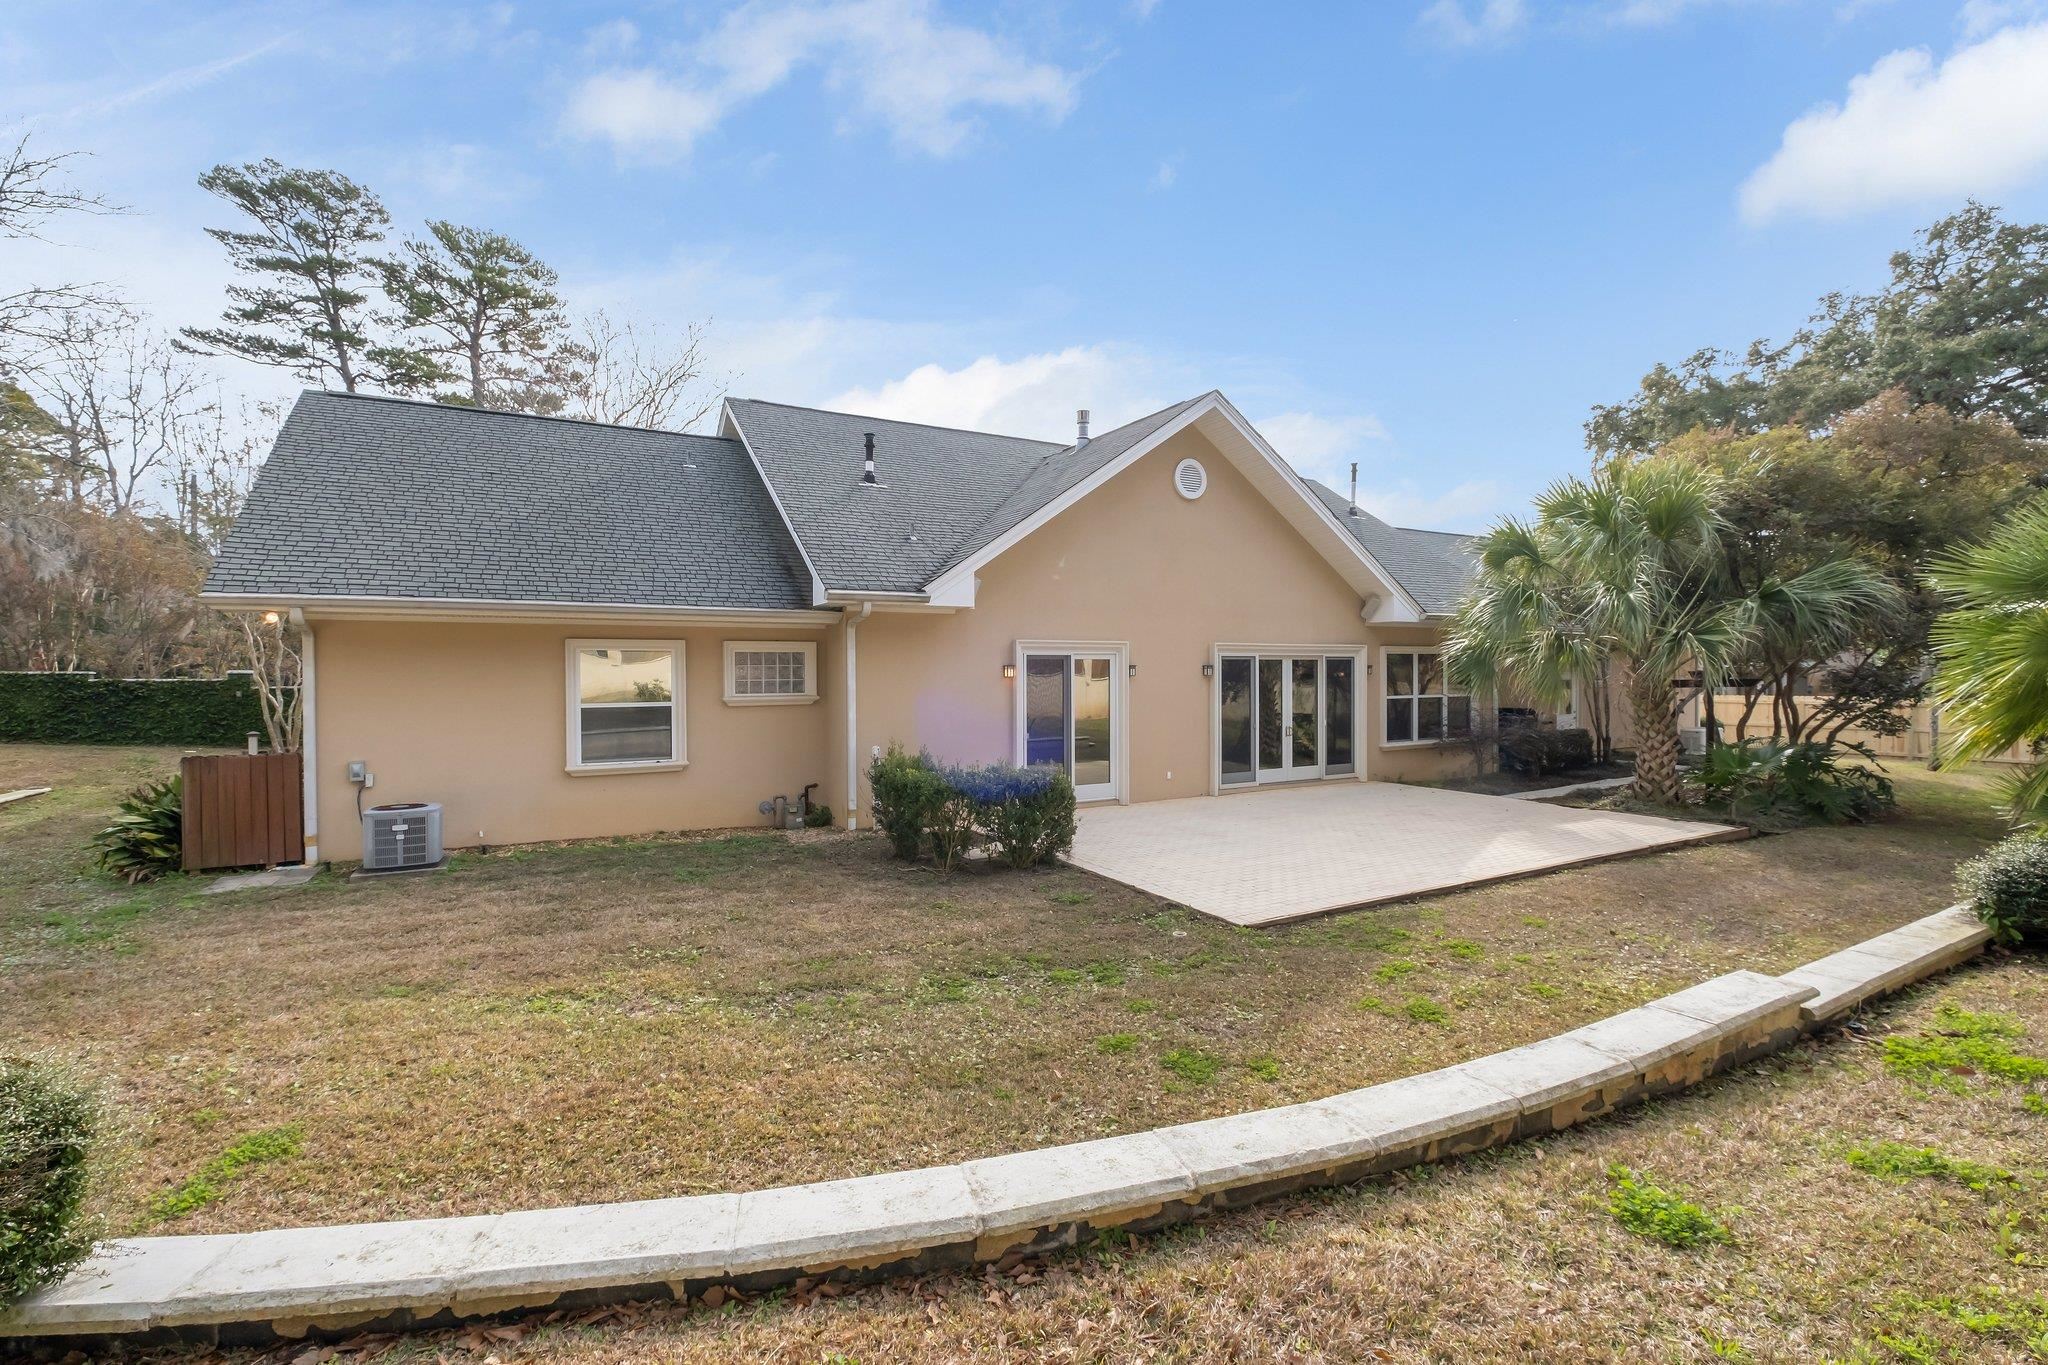 1504 China Grove Trail,TALLAHASSEE,Florida 32301,3 Bedrooms Bedrooms,2 BathroomsBathrooms,Detached single family,1504 China Grove Trail,368472